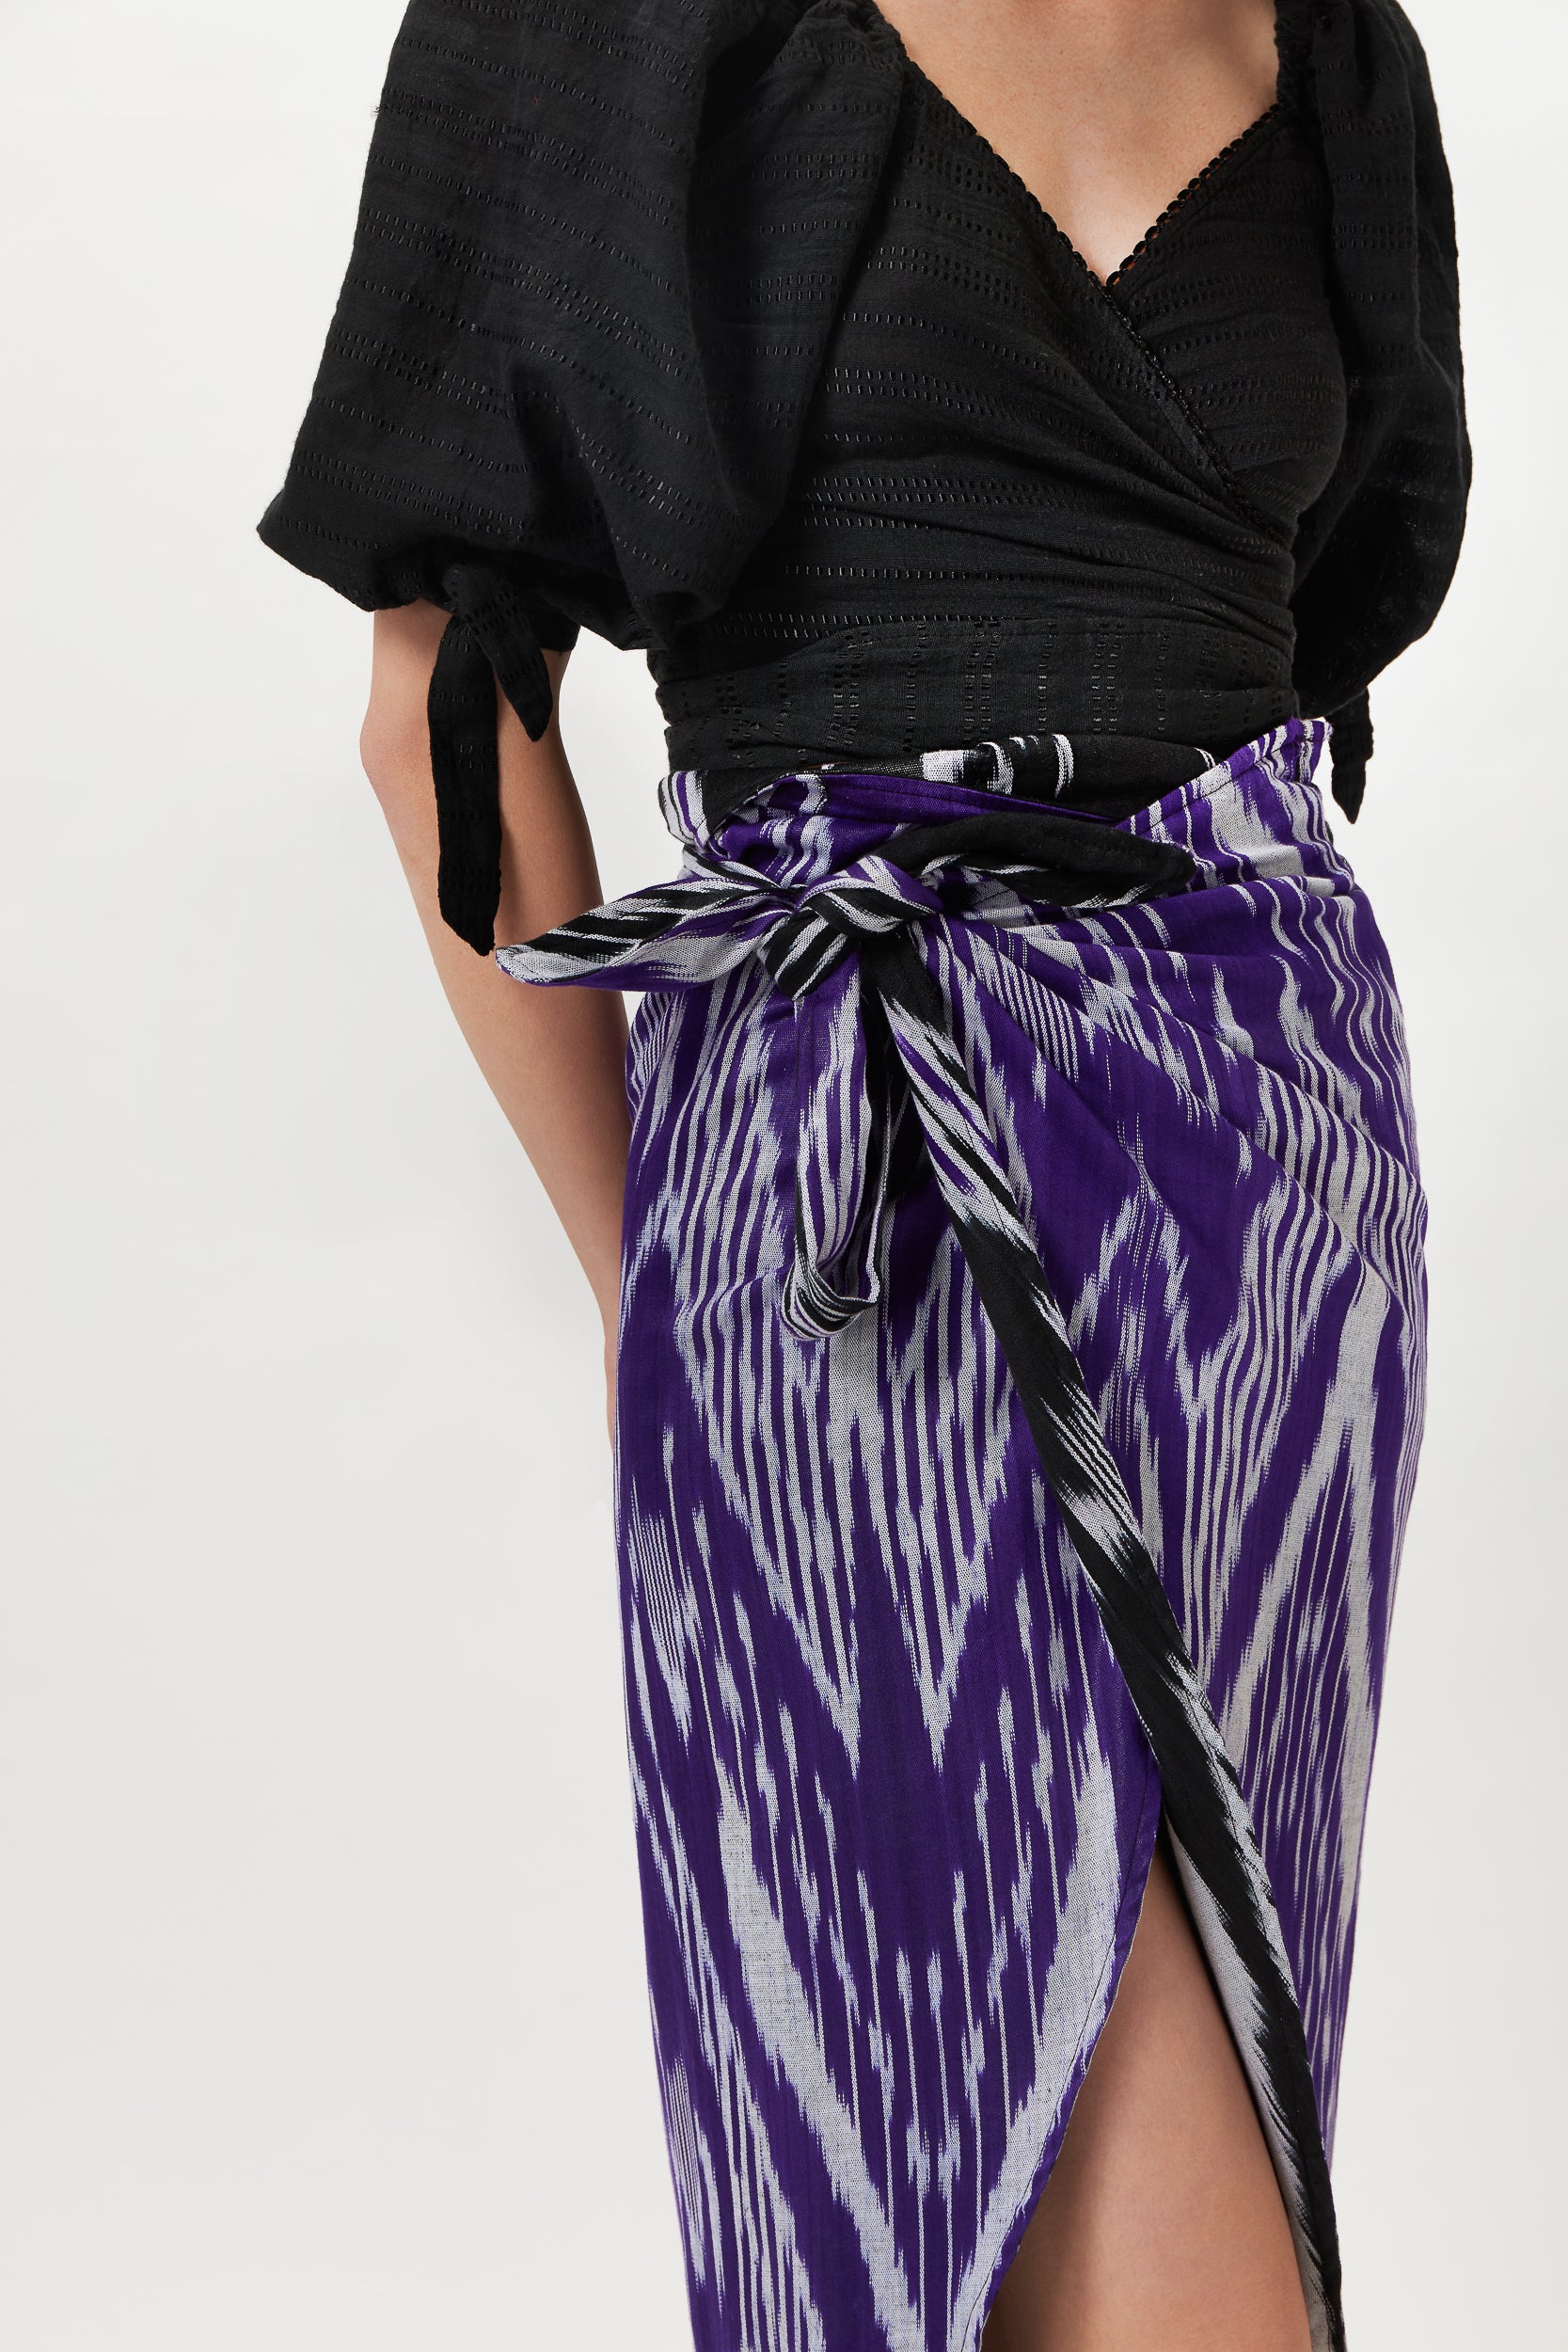 ZINA ONE OF A KIND DOUBLE-FACED IKAT SKIRT